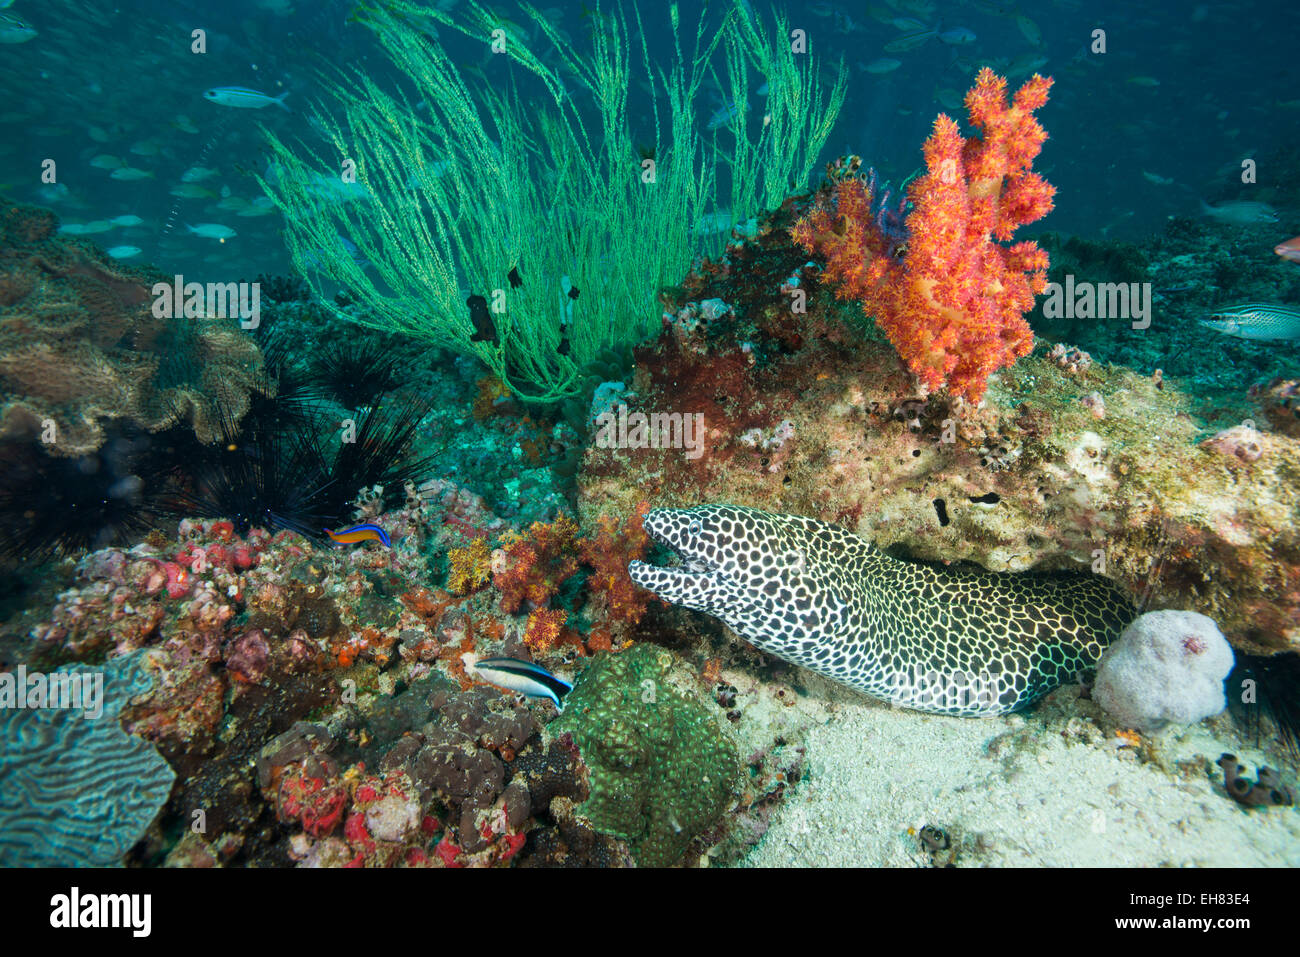 Spotted eel at the Aquarium, Dimaniyat Islands, Gulf of Oman, Oman, Middle East Stock Photo